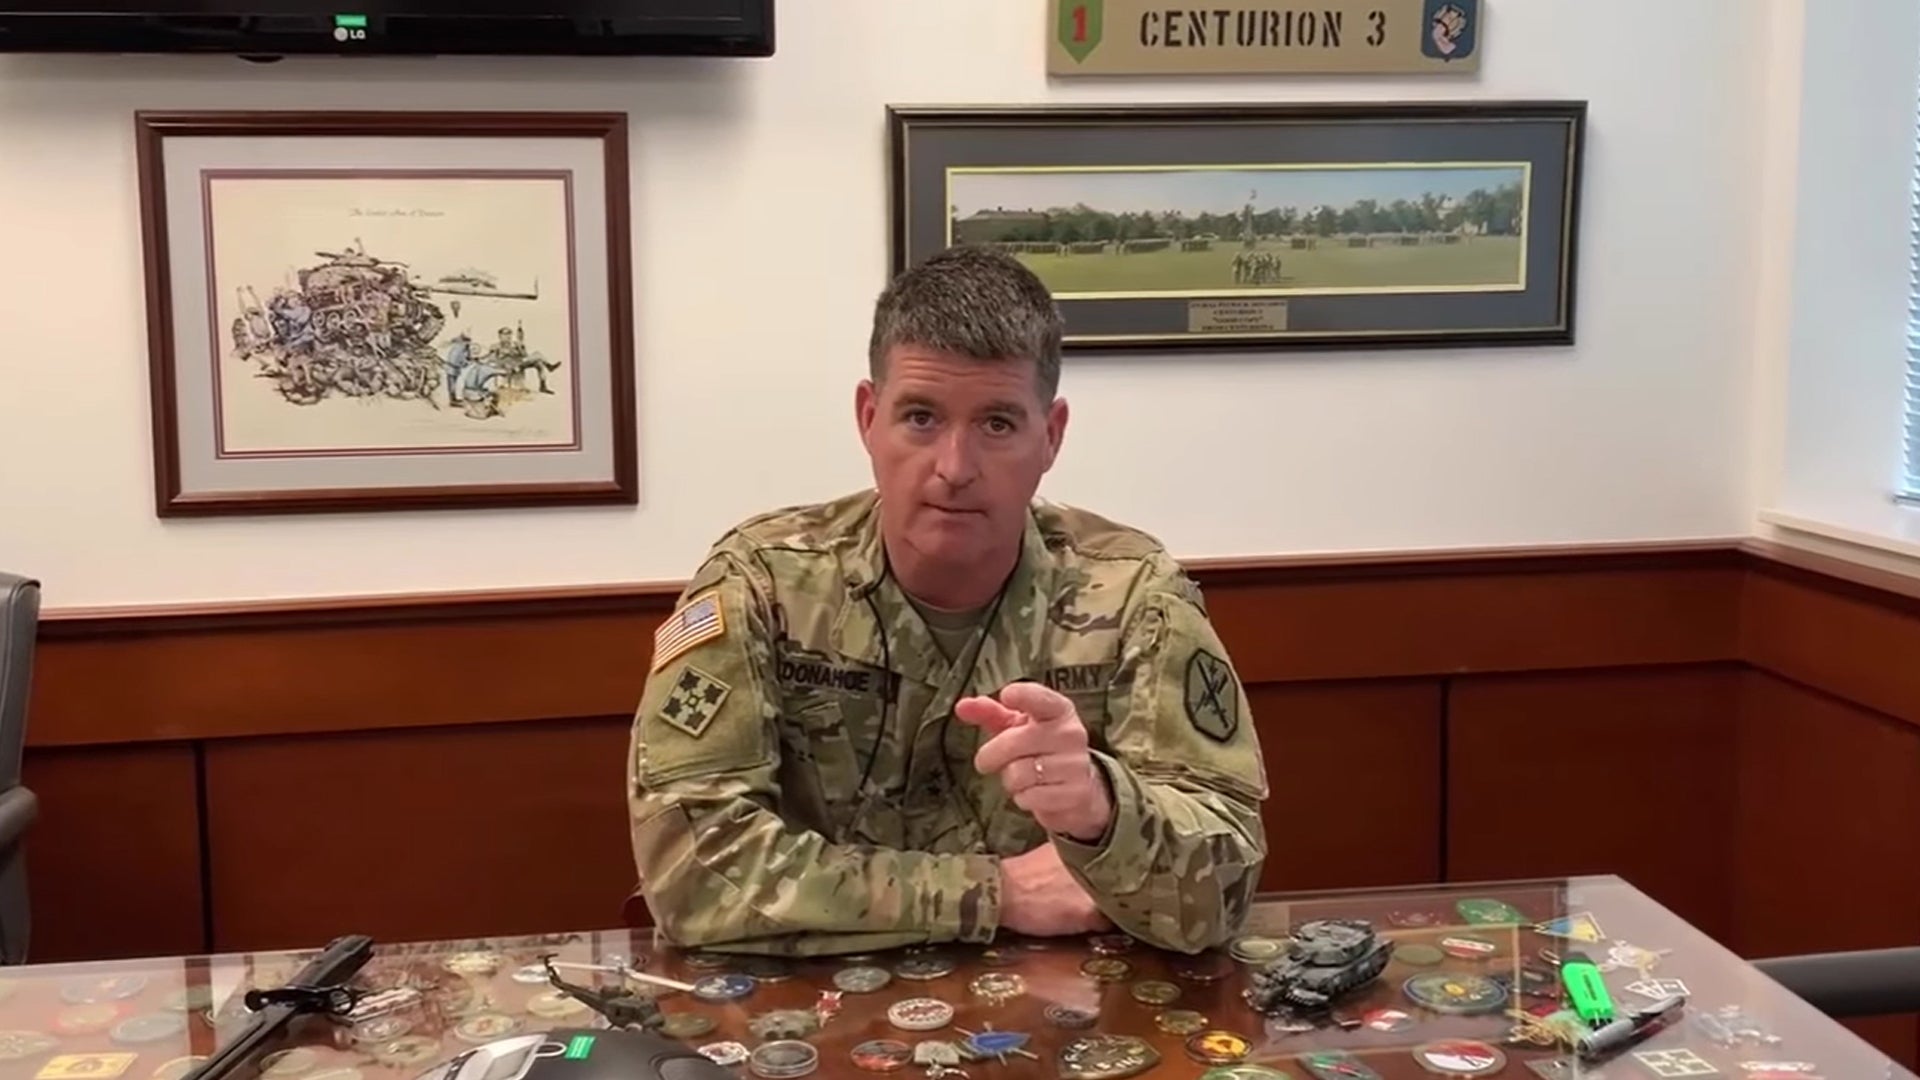 Army Maj. Gen. Patrick J. Donahoe retired in January 2023, months after an Army investigation found that he had created bad publicity for the service by defending female troops in response to a commentary from Tucker Carlson. (Army photo)